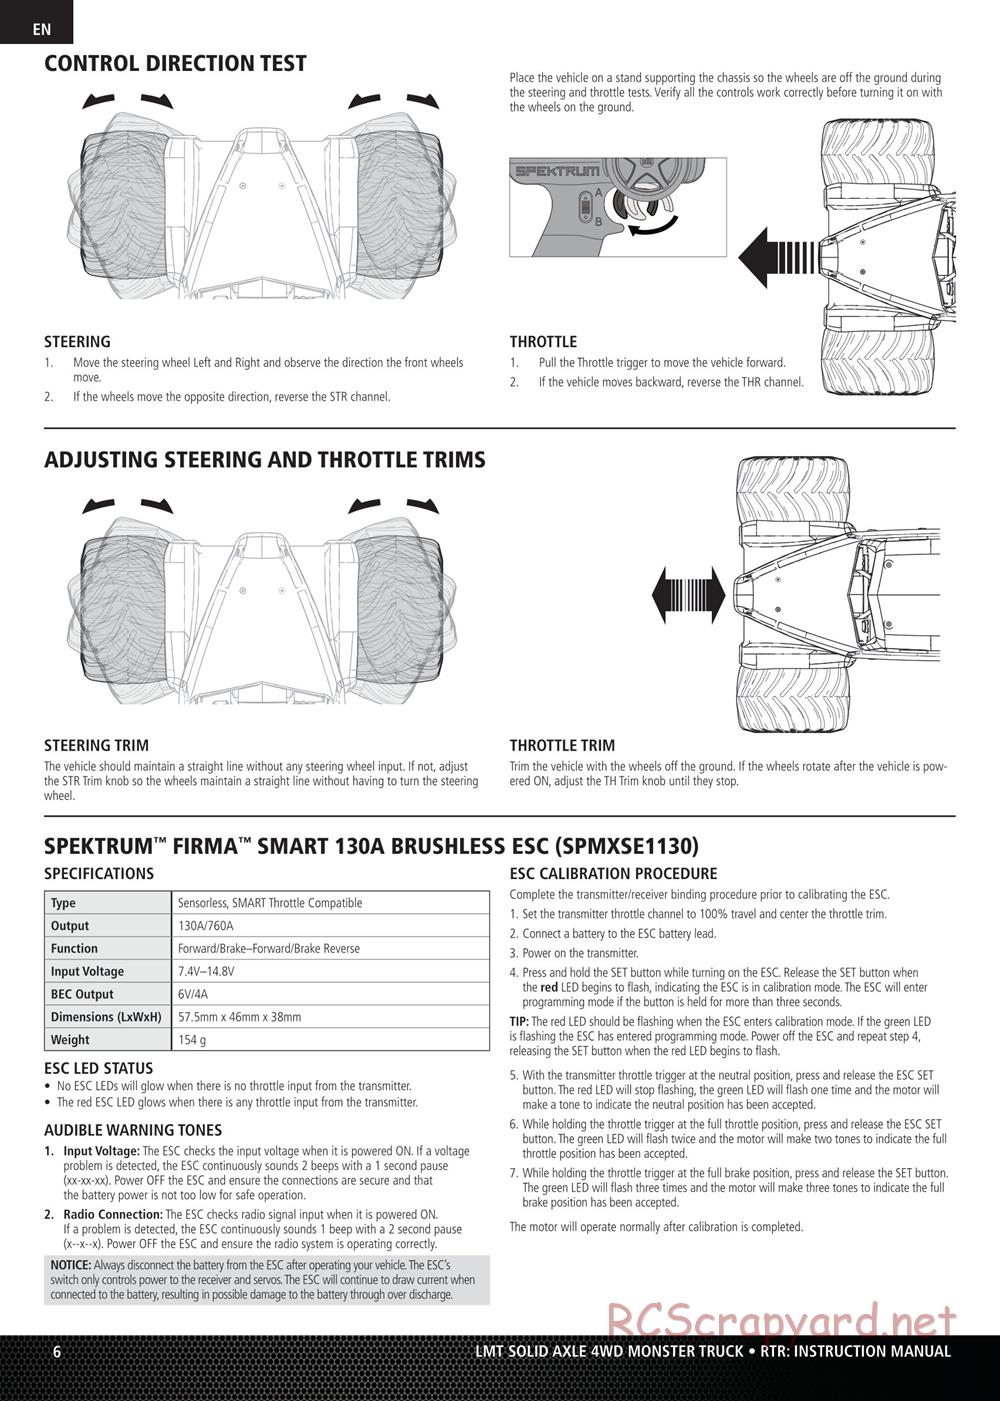 Team Losi - LMT Solid Axle Roller - Manual - Page 6